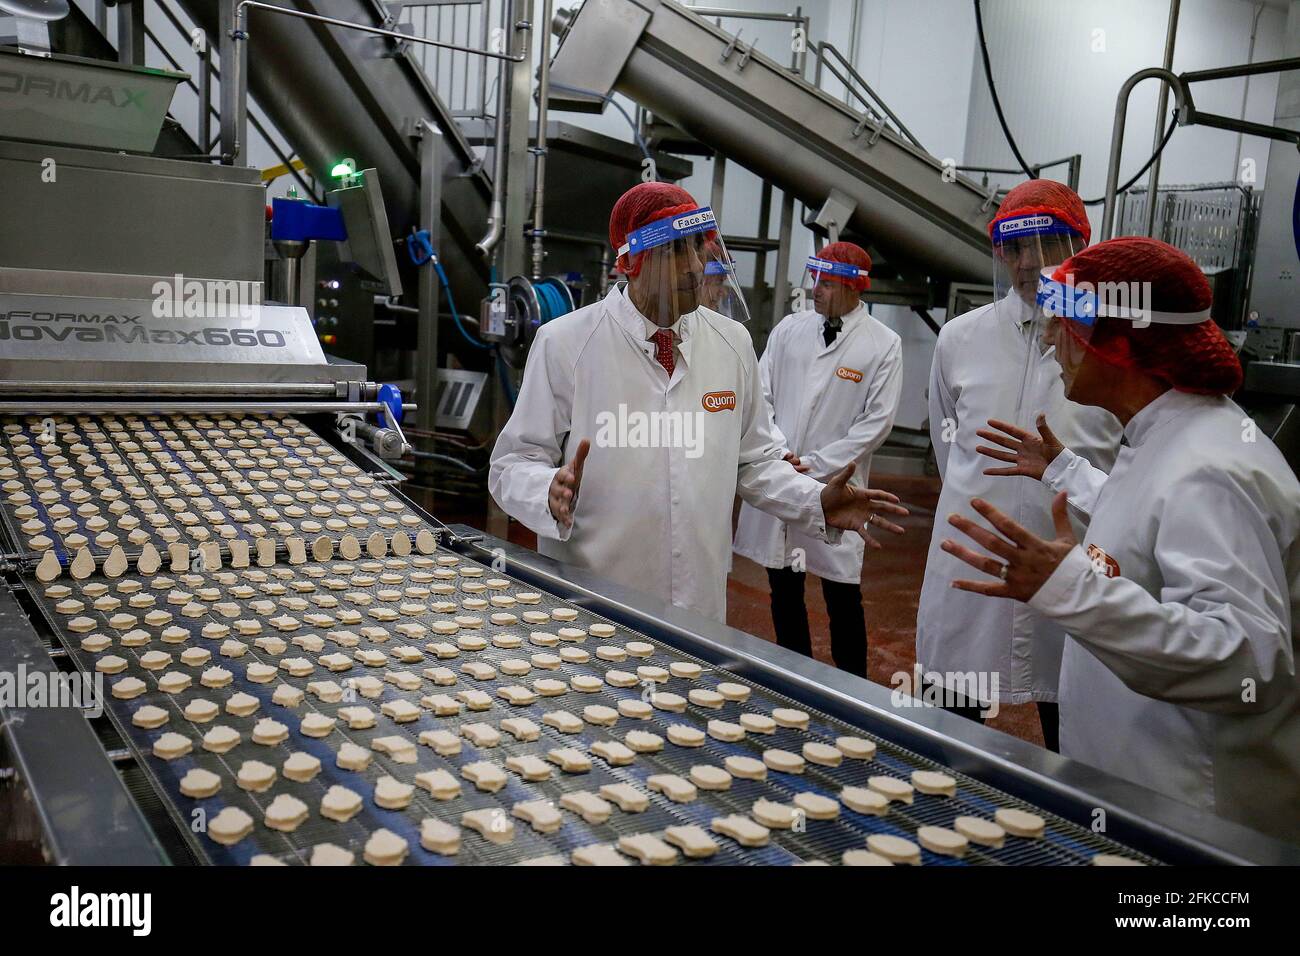 EDITORIAL USE ONLY Rishi Sunak, MP for Richmond, looks at the production line during a visit to Quorn Foods' headquarters in Stokesley in his local constituency in North Yorkshire, to discuss climate change and how to build a more sustainable global food system. Picture date: Friday April 30, 2021. Stock Photo